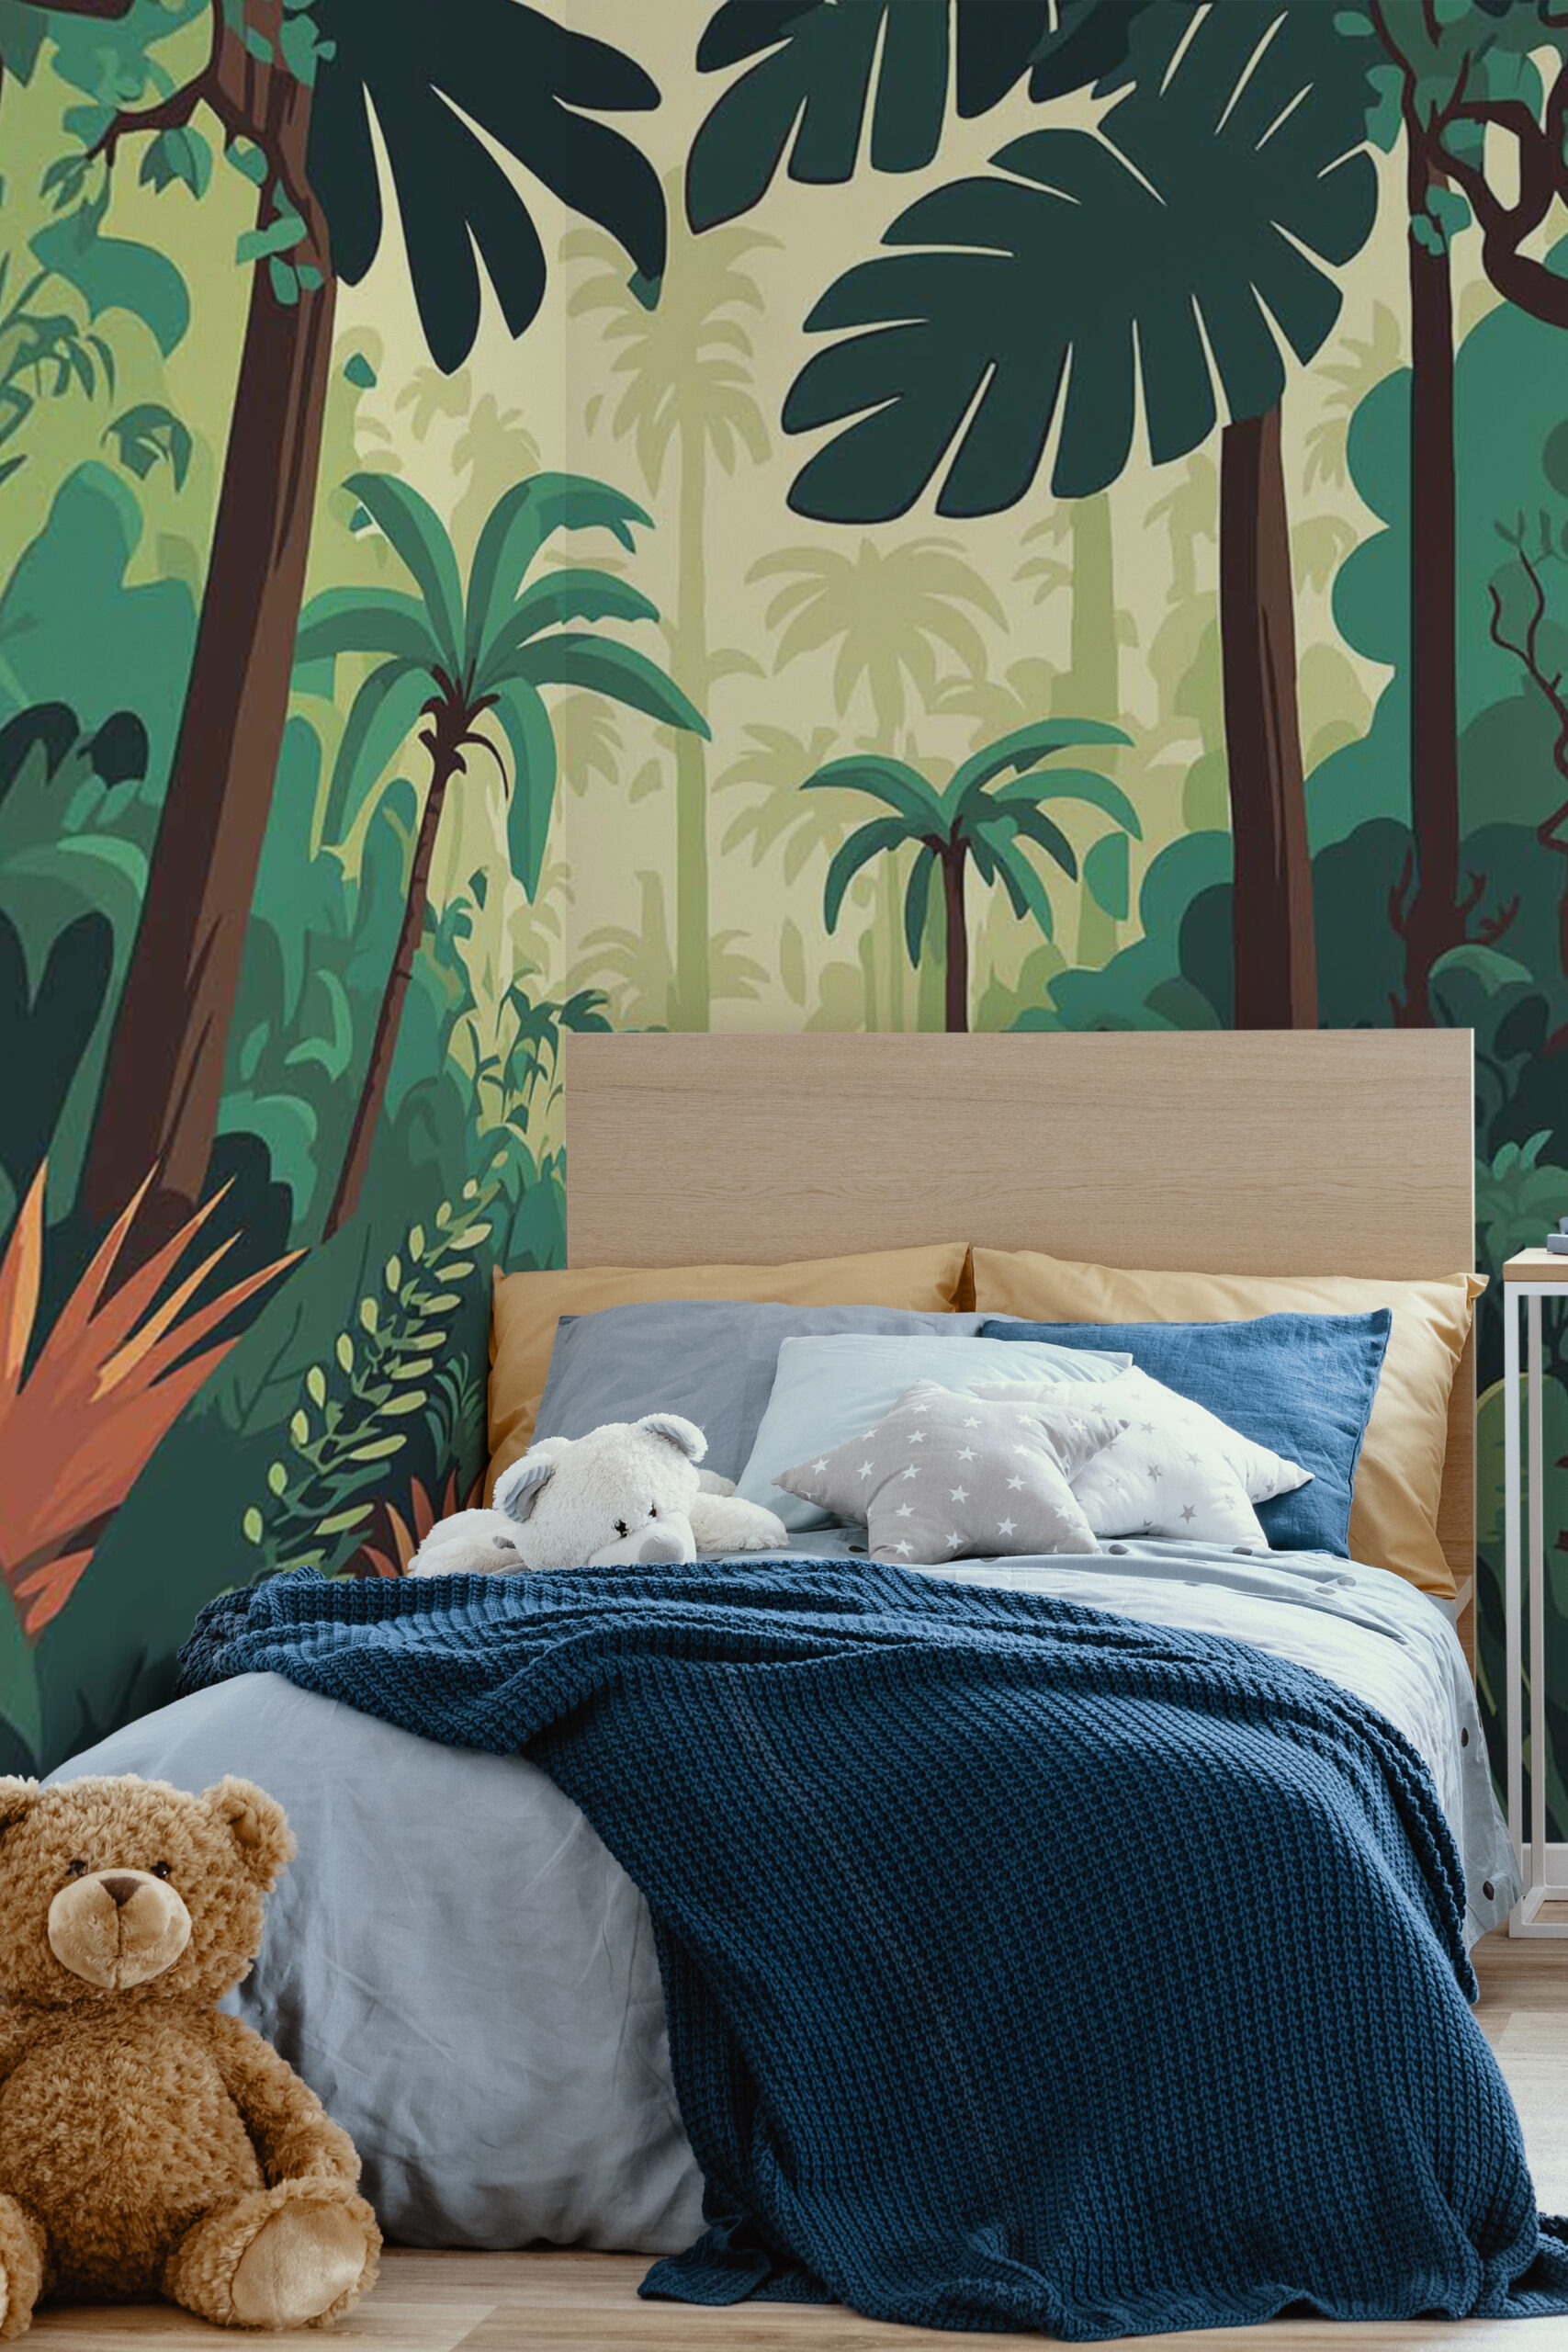 Fancy Walls Green Plant and Tree peel and stick wall murals